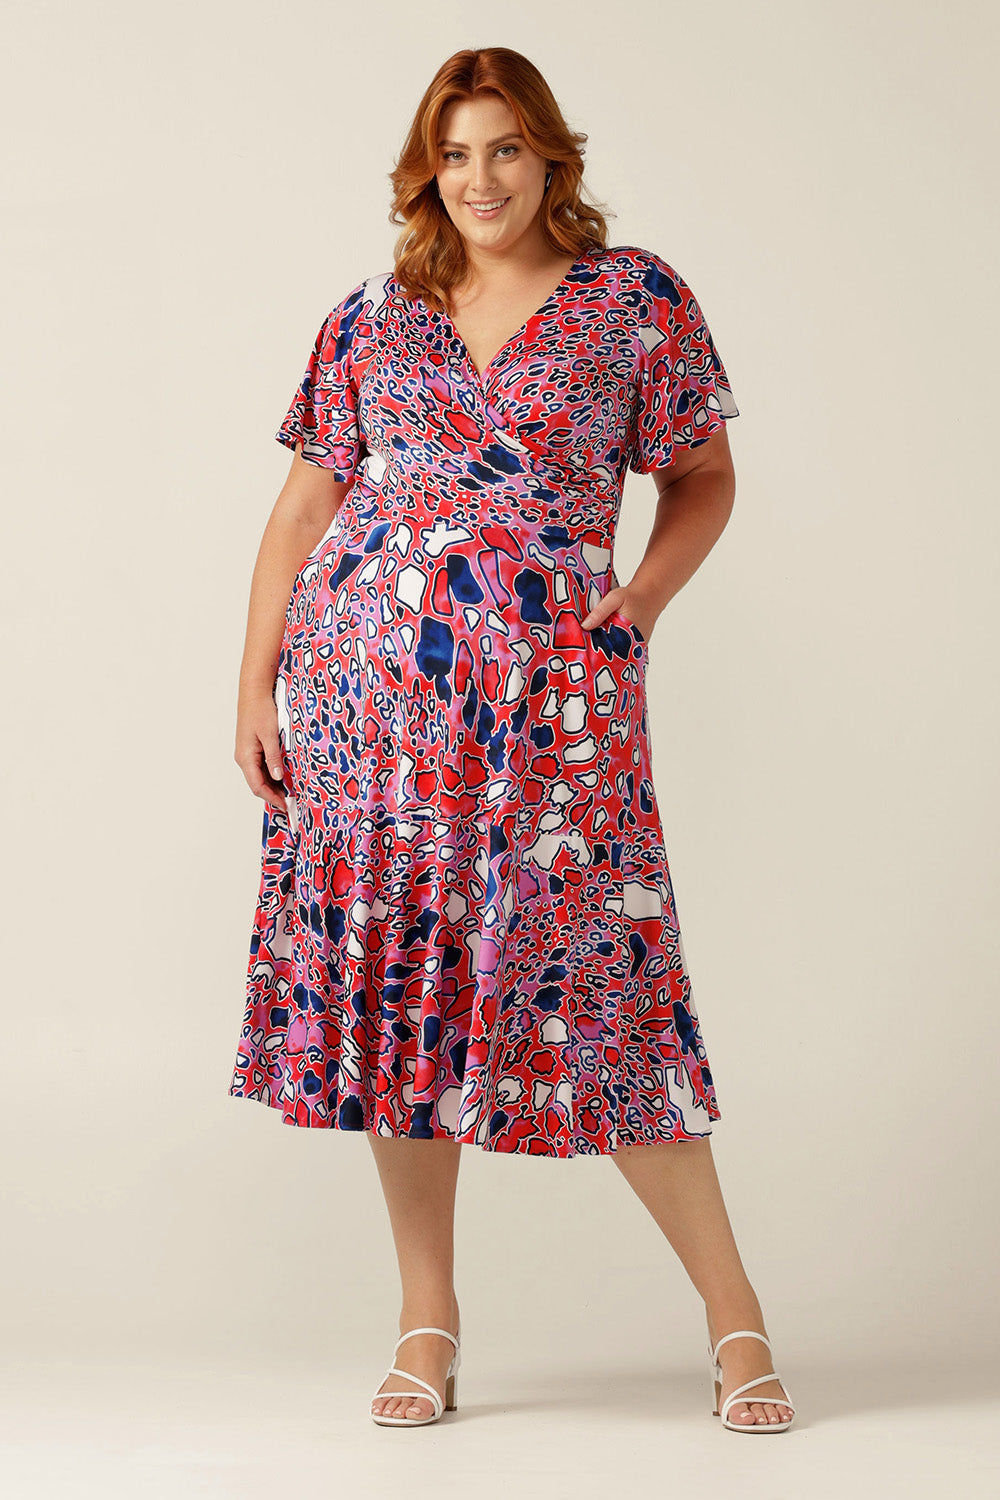 fixed wrap jersey dress with flutter sleeves, pockets and ruffle on skirt.